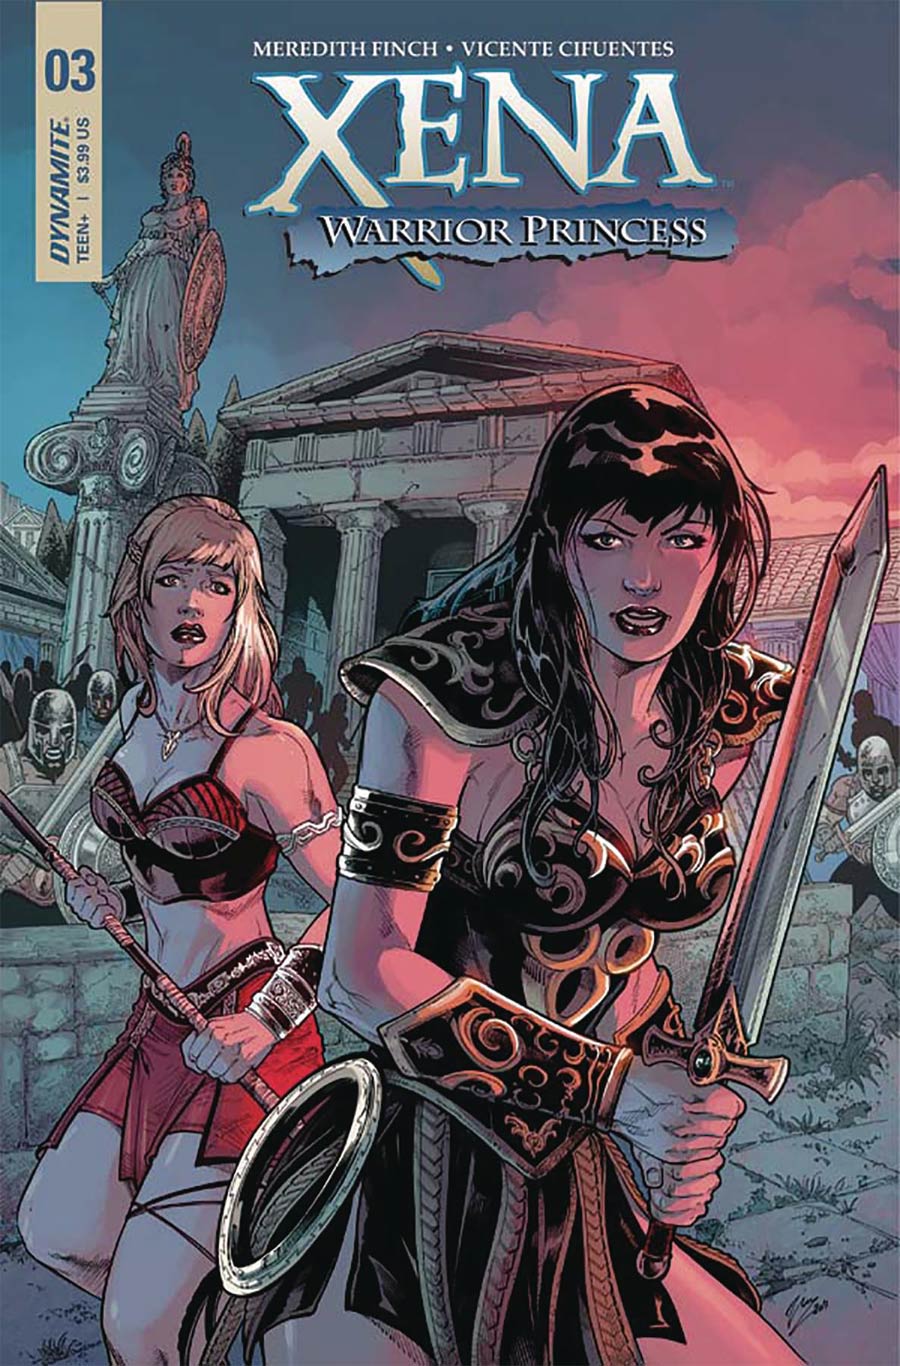 Xena Vol 2 #3 Cover B Variant Vicente Cifuentes Cover